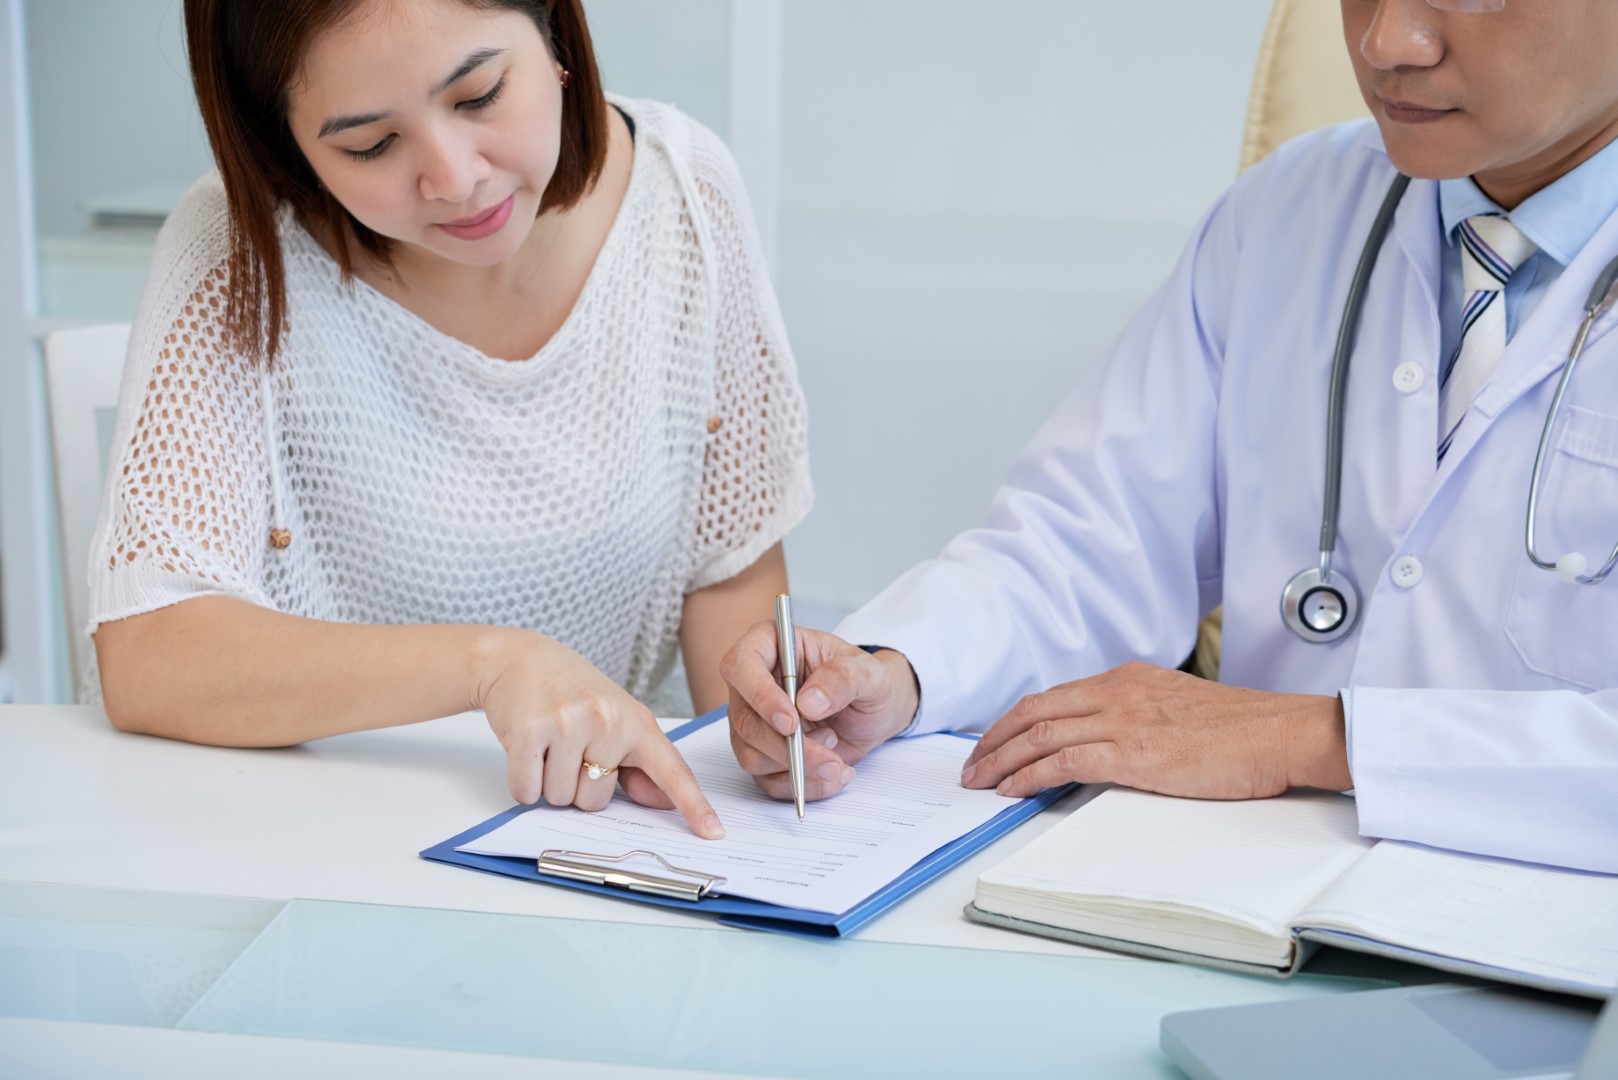 A woman and a male doctor sitting next to each other at a desk filling out paperwork on a clipboard.